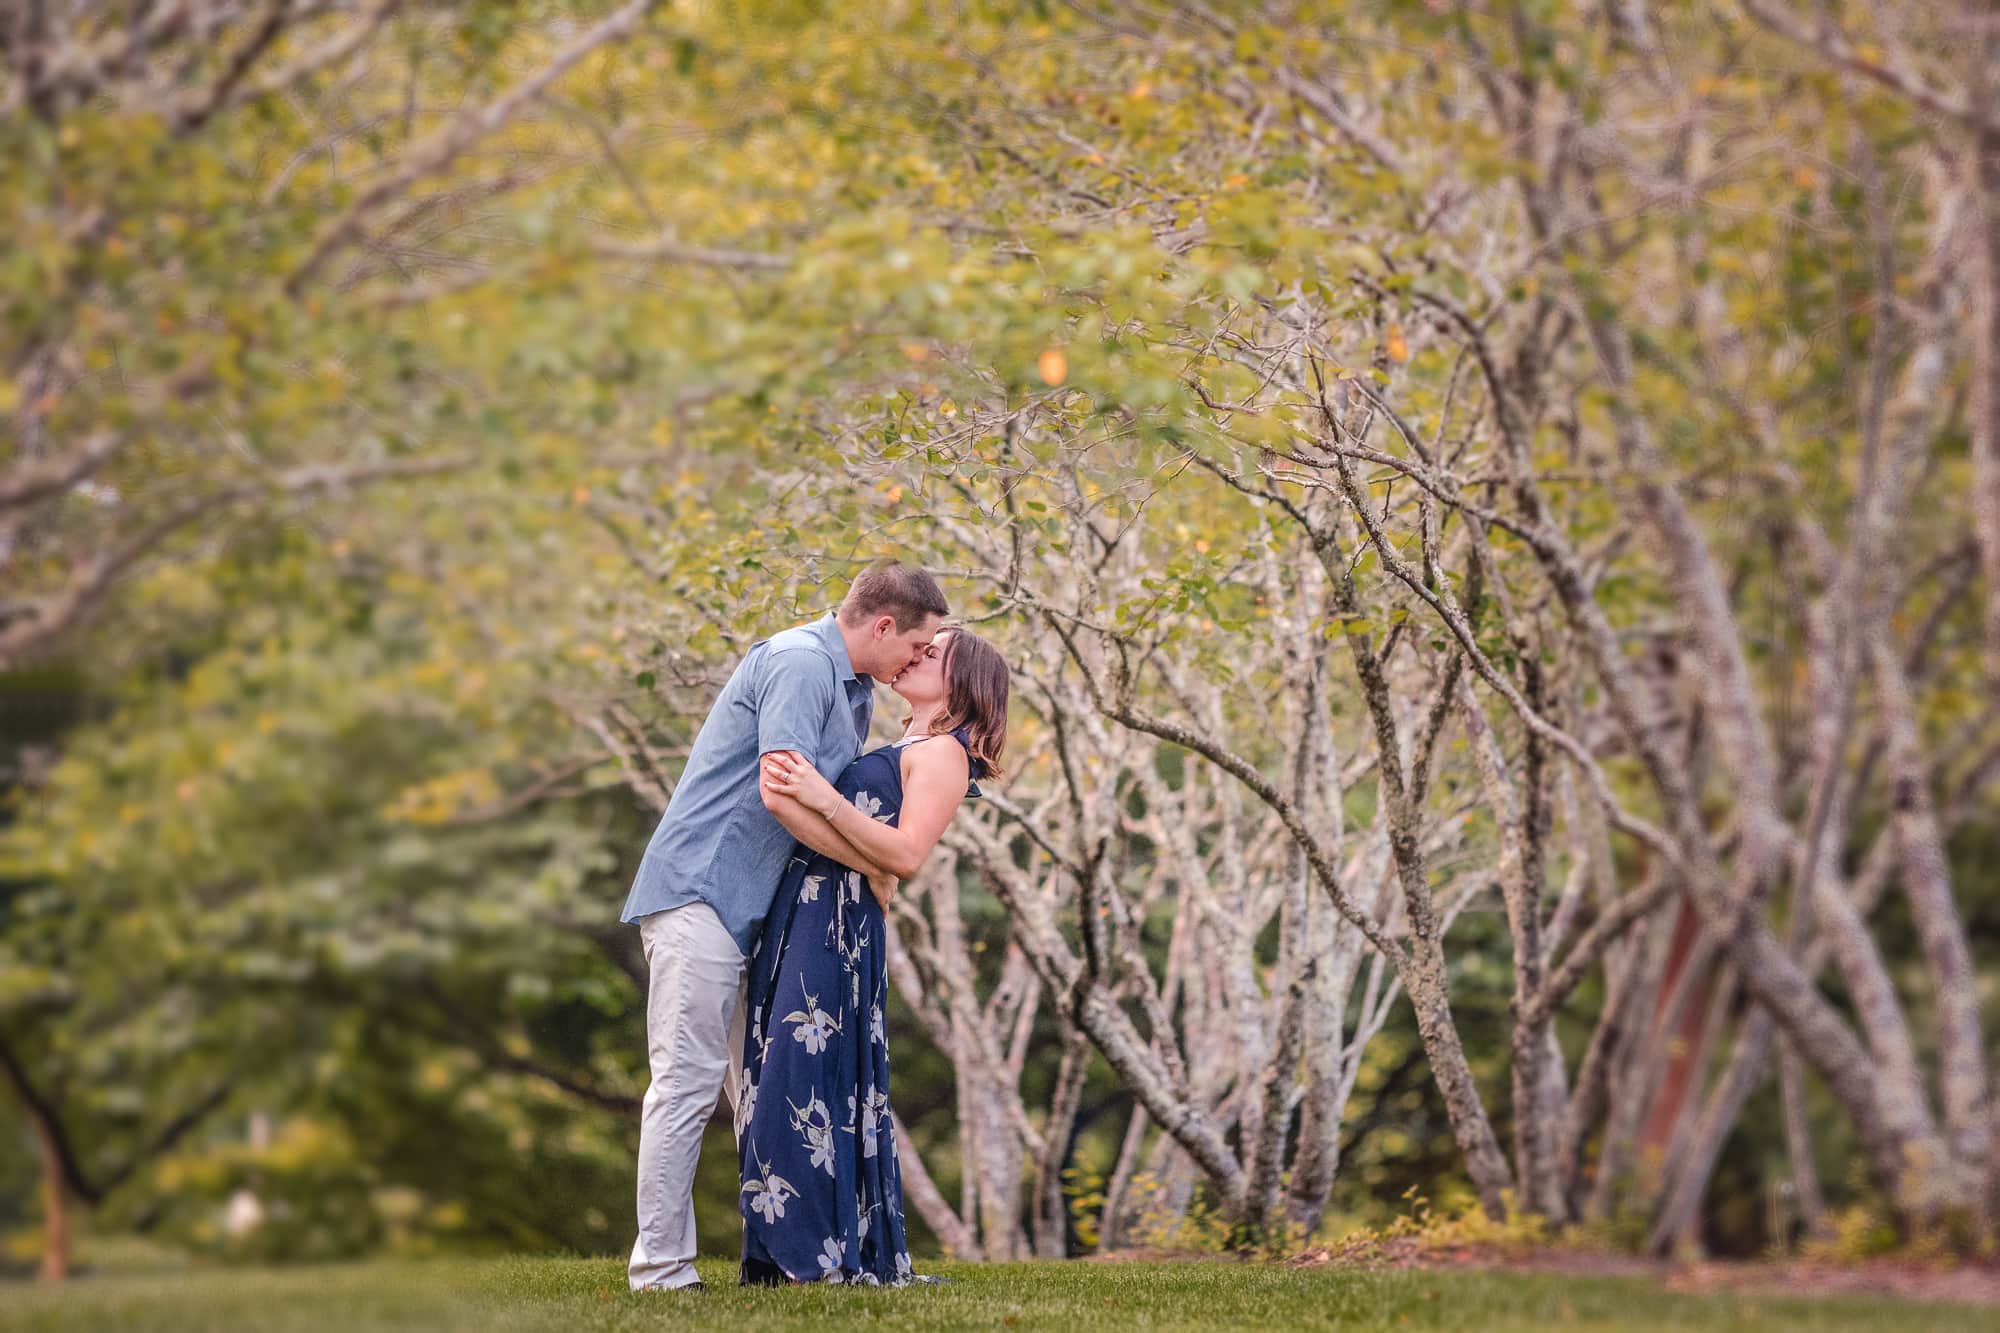 Couple embracing in treed park in Asheville, North Carolina photography done by Kathy Beaver.